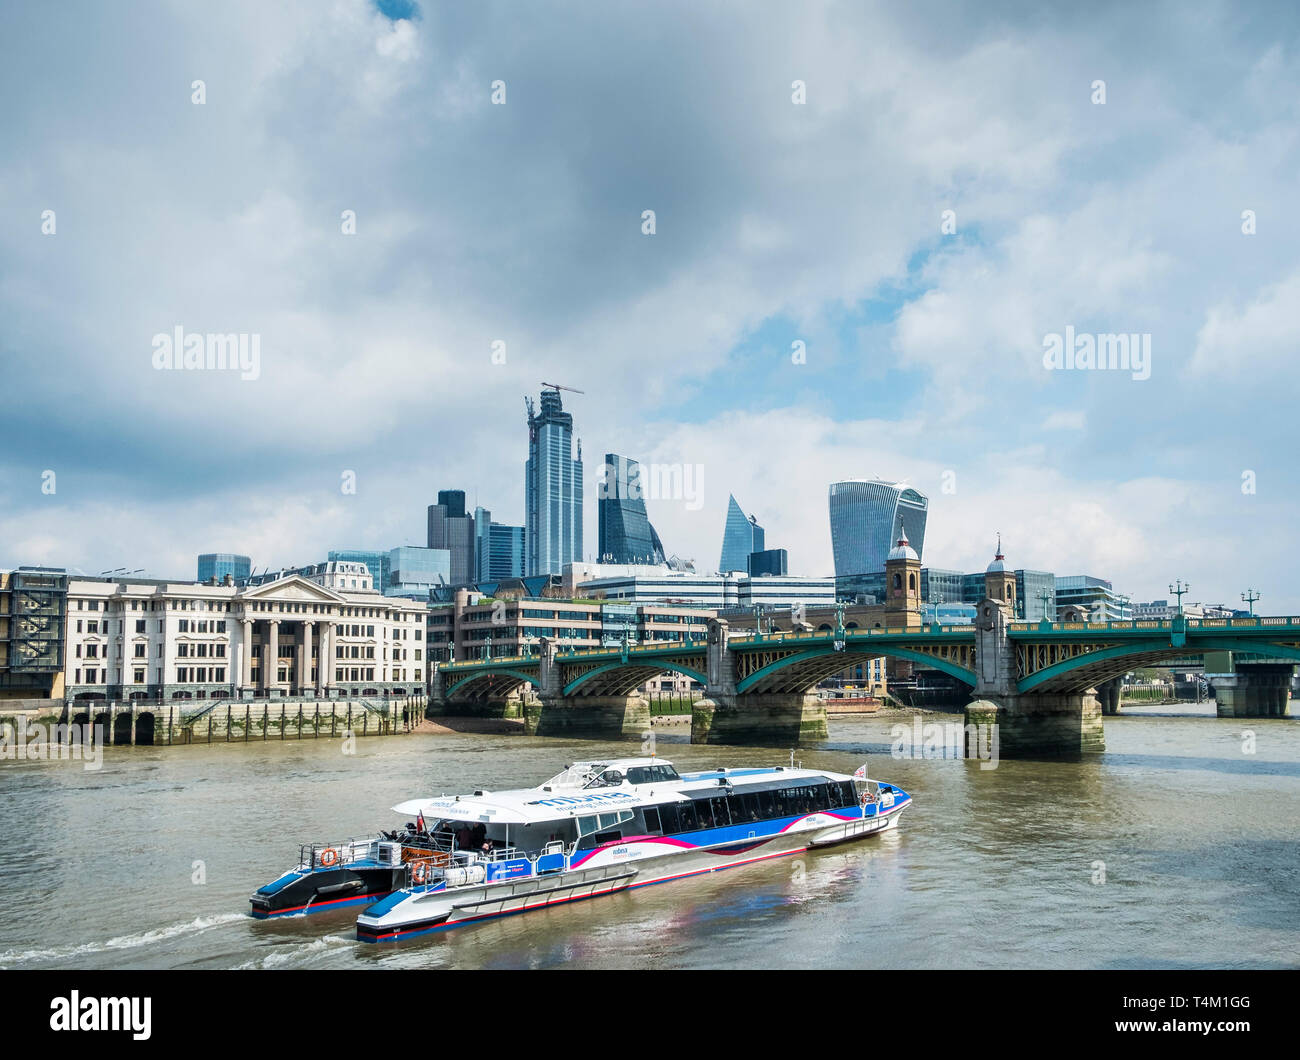 A Thames Clipper River Boat on the River Thames approaching Southwark Bridge in London. Stock Photo